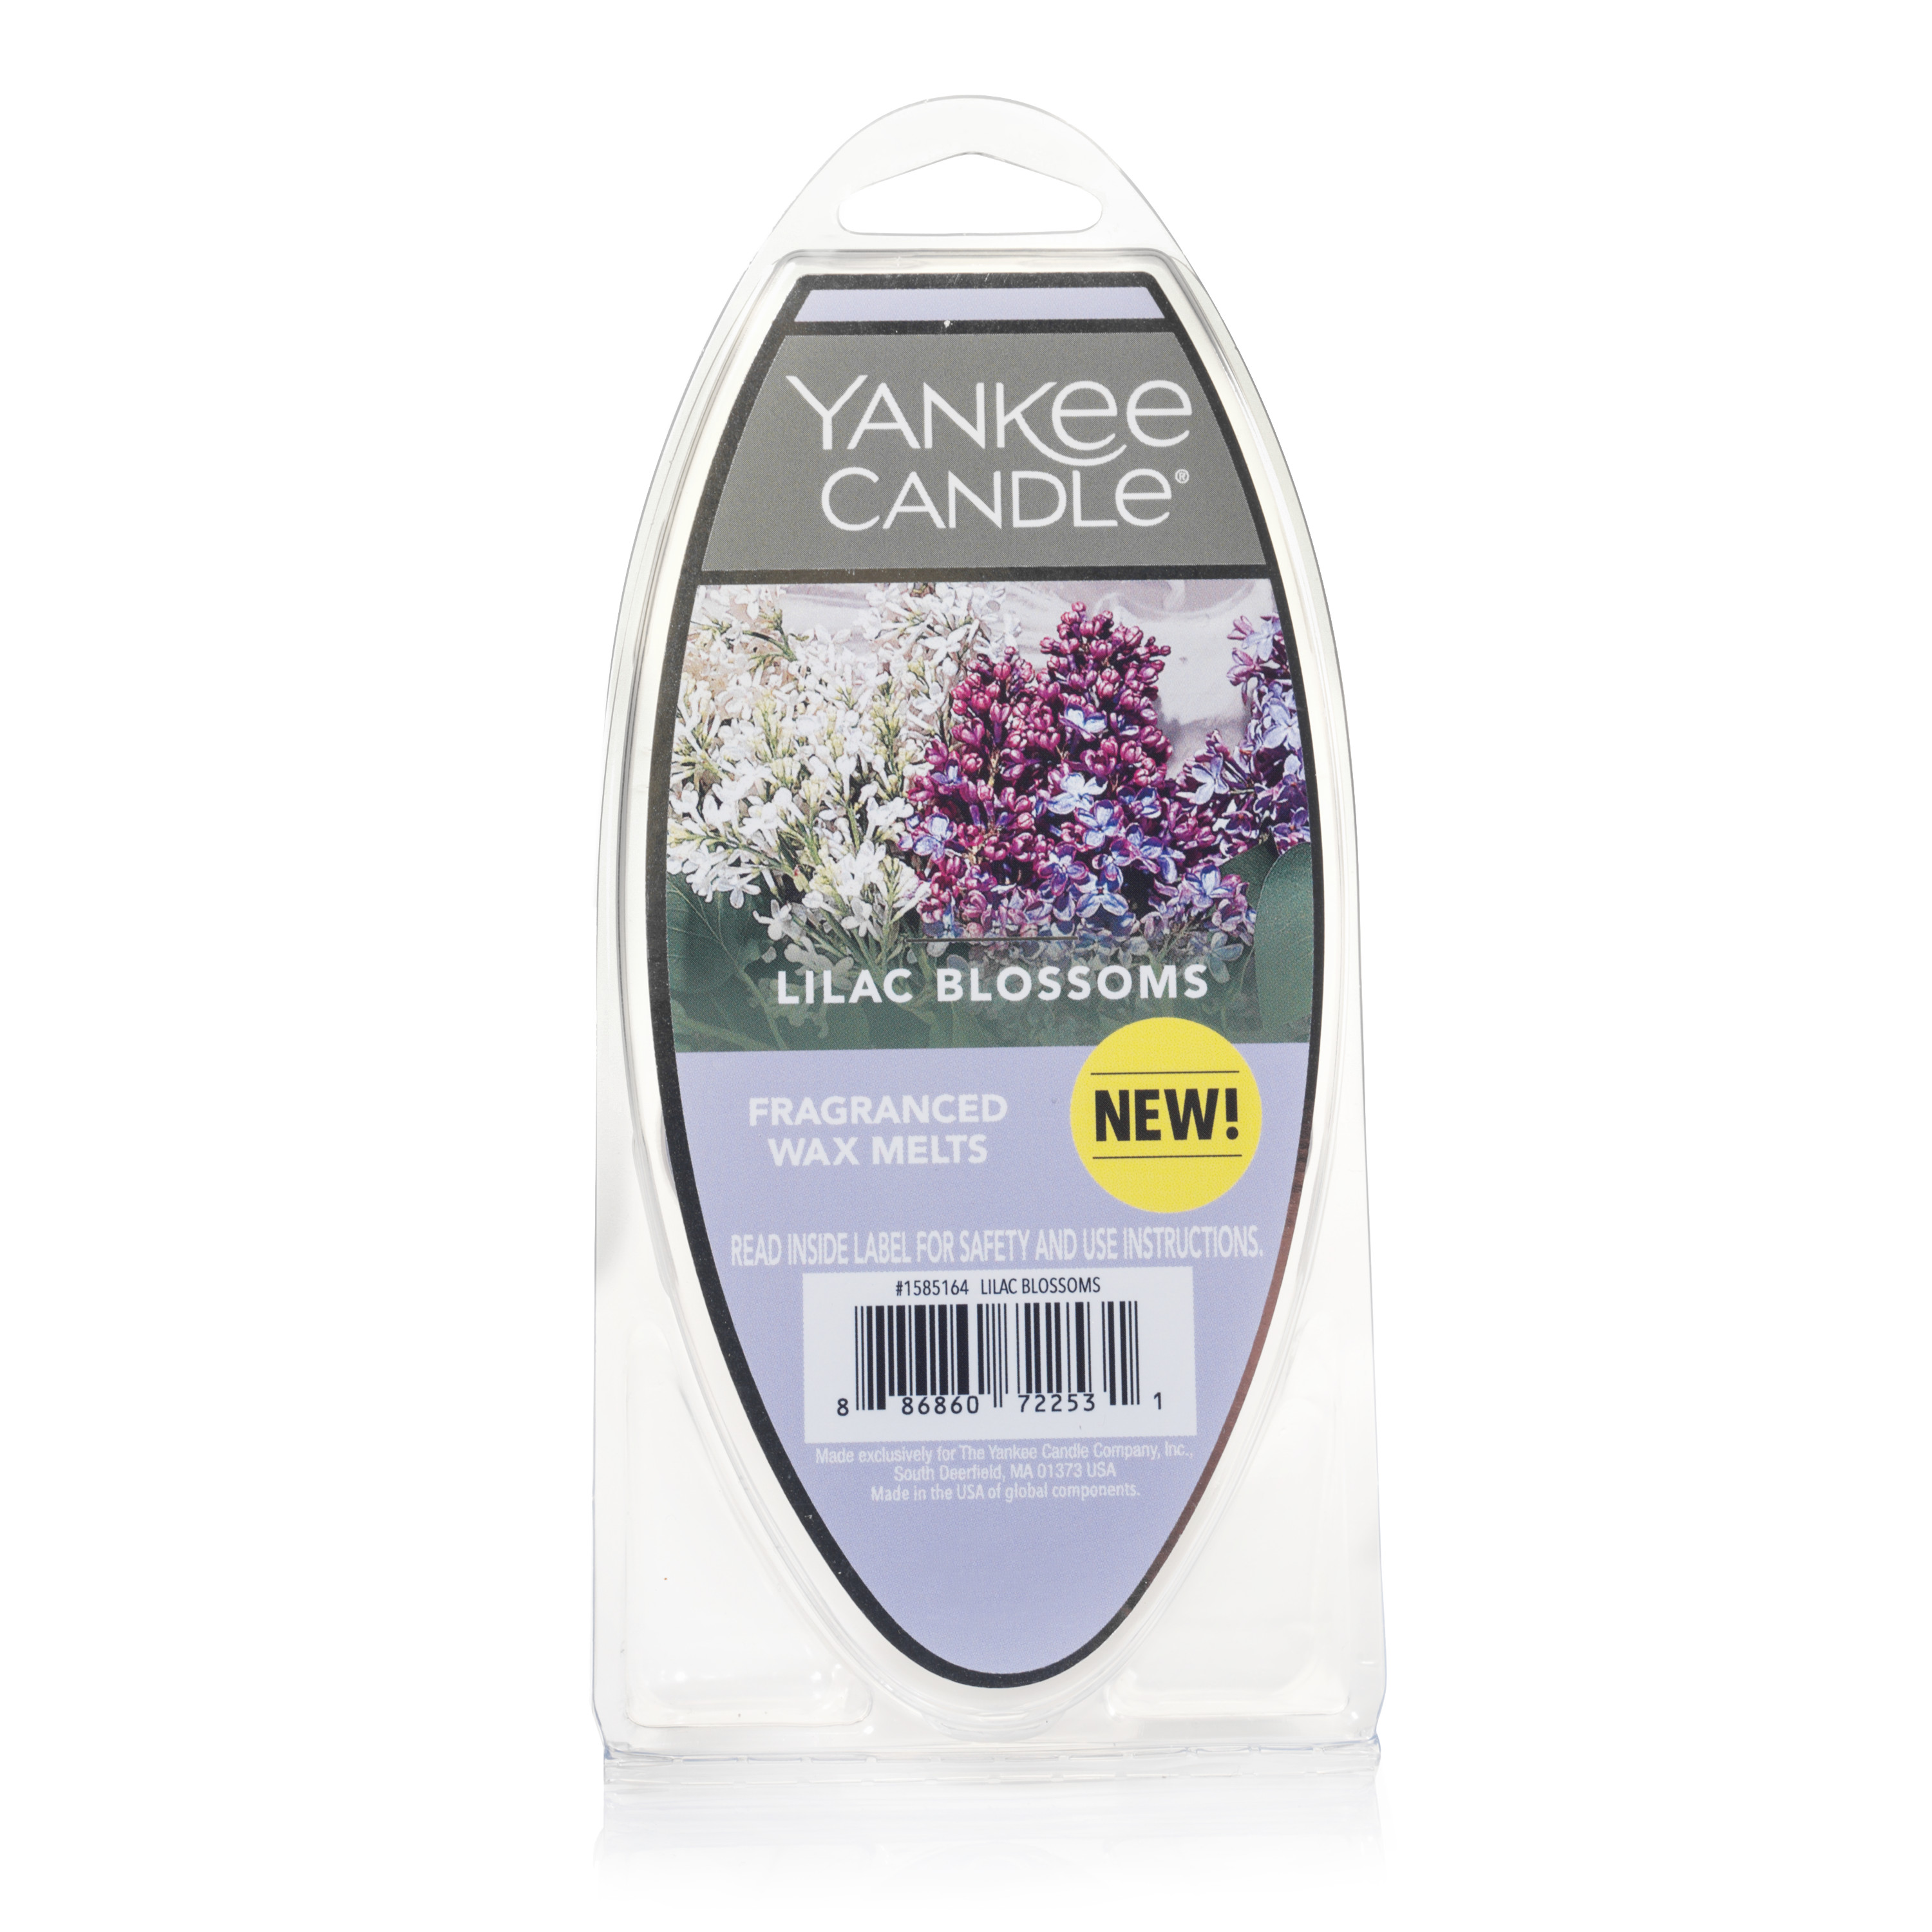 Yankee Candle Wax Melts, Lilac Blossoms - 6 candles, 2.6 oz